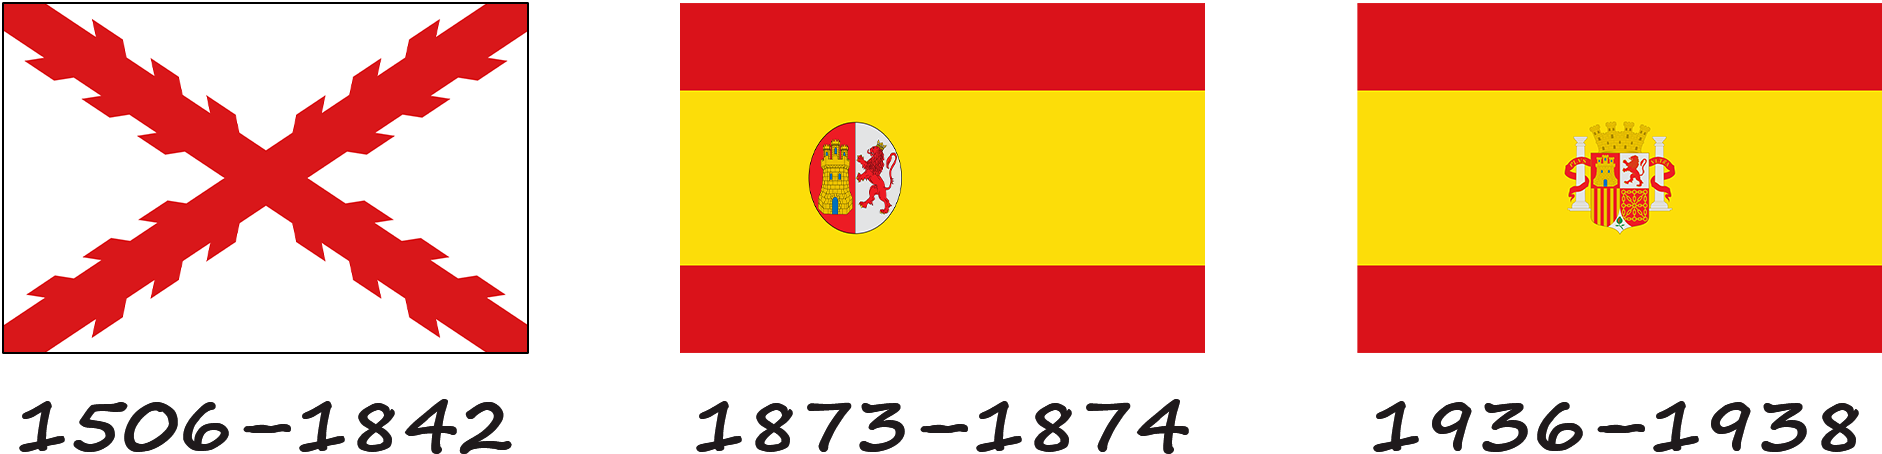 History of the Spanish flag